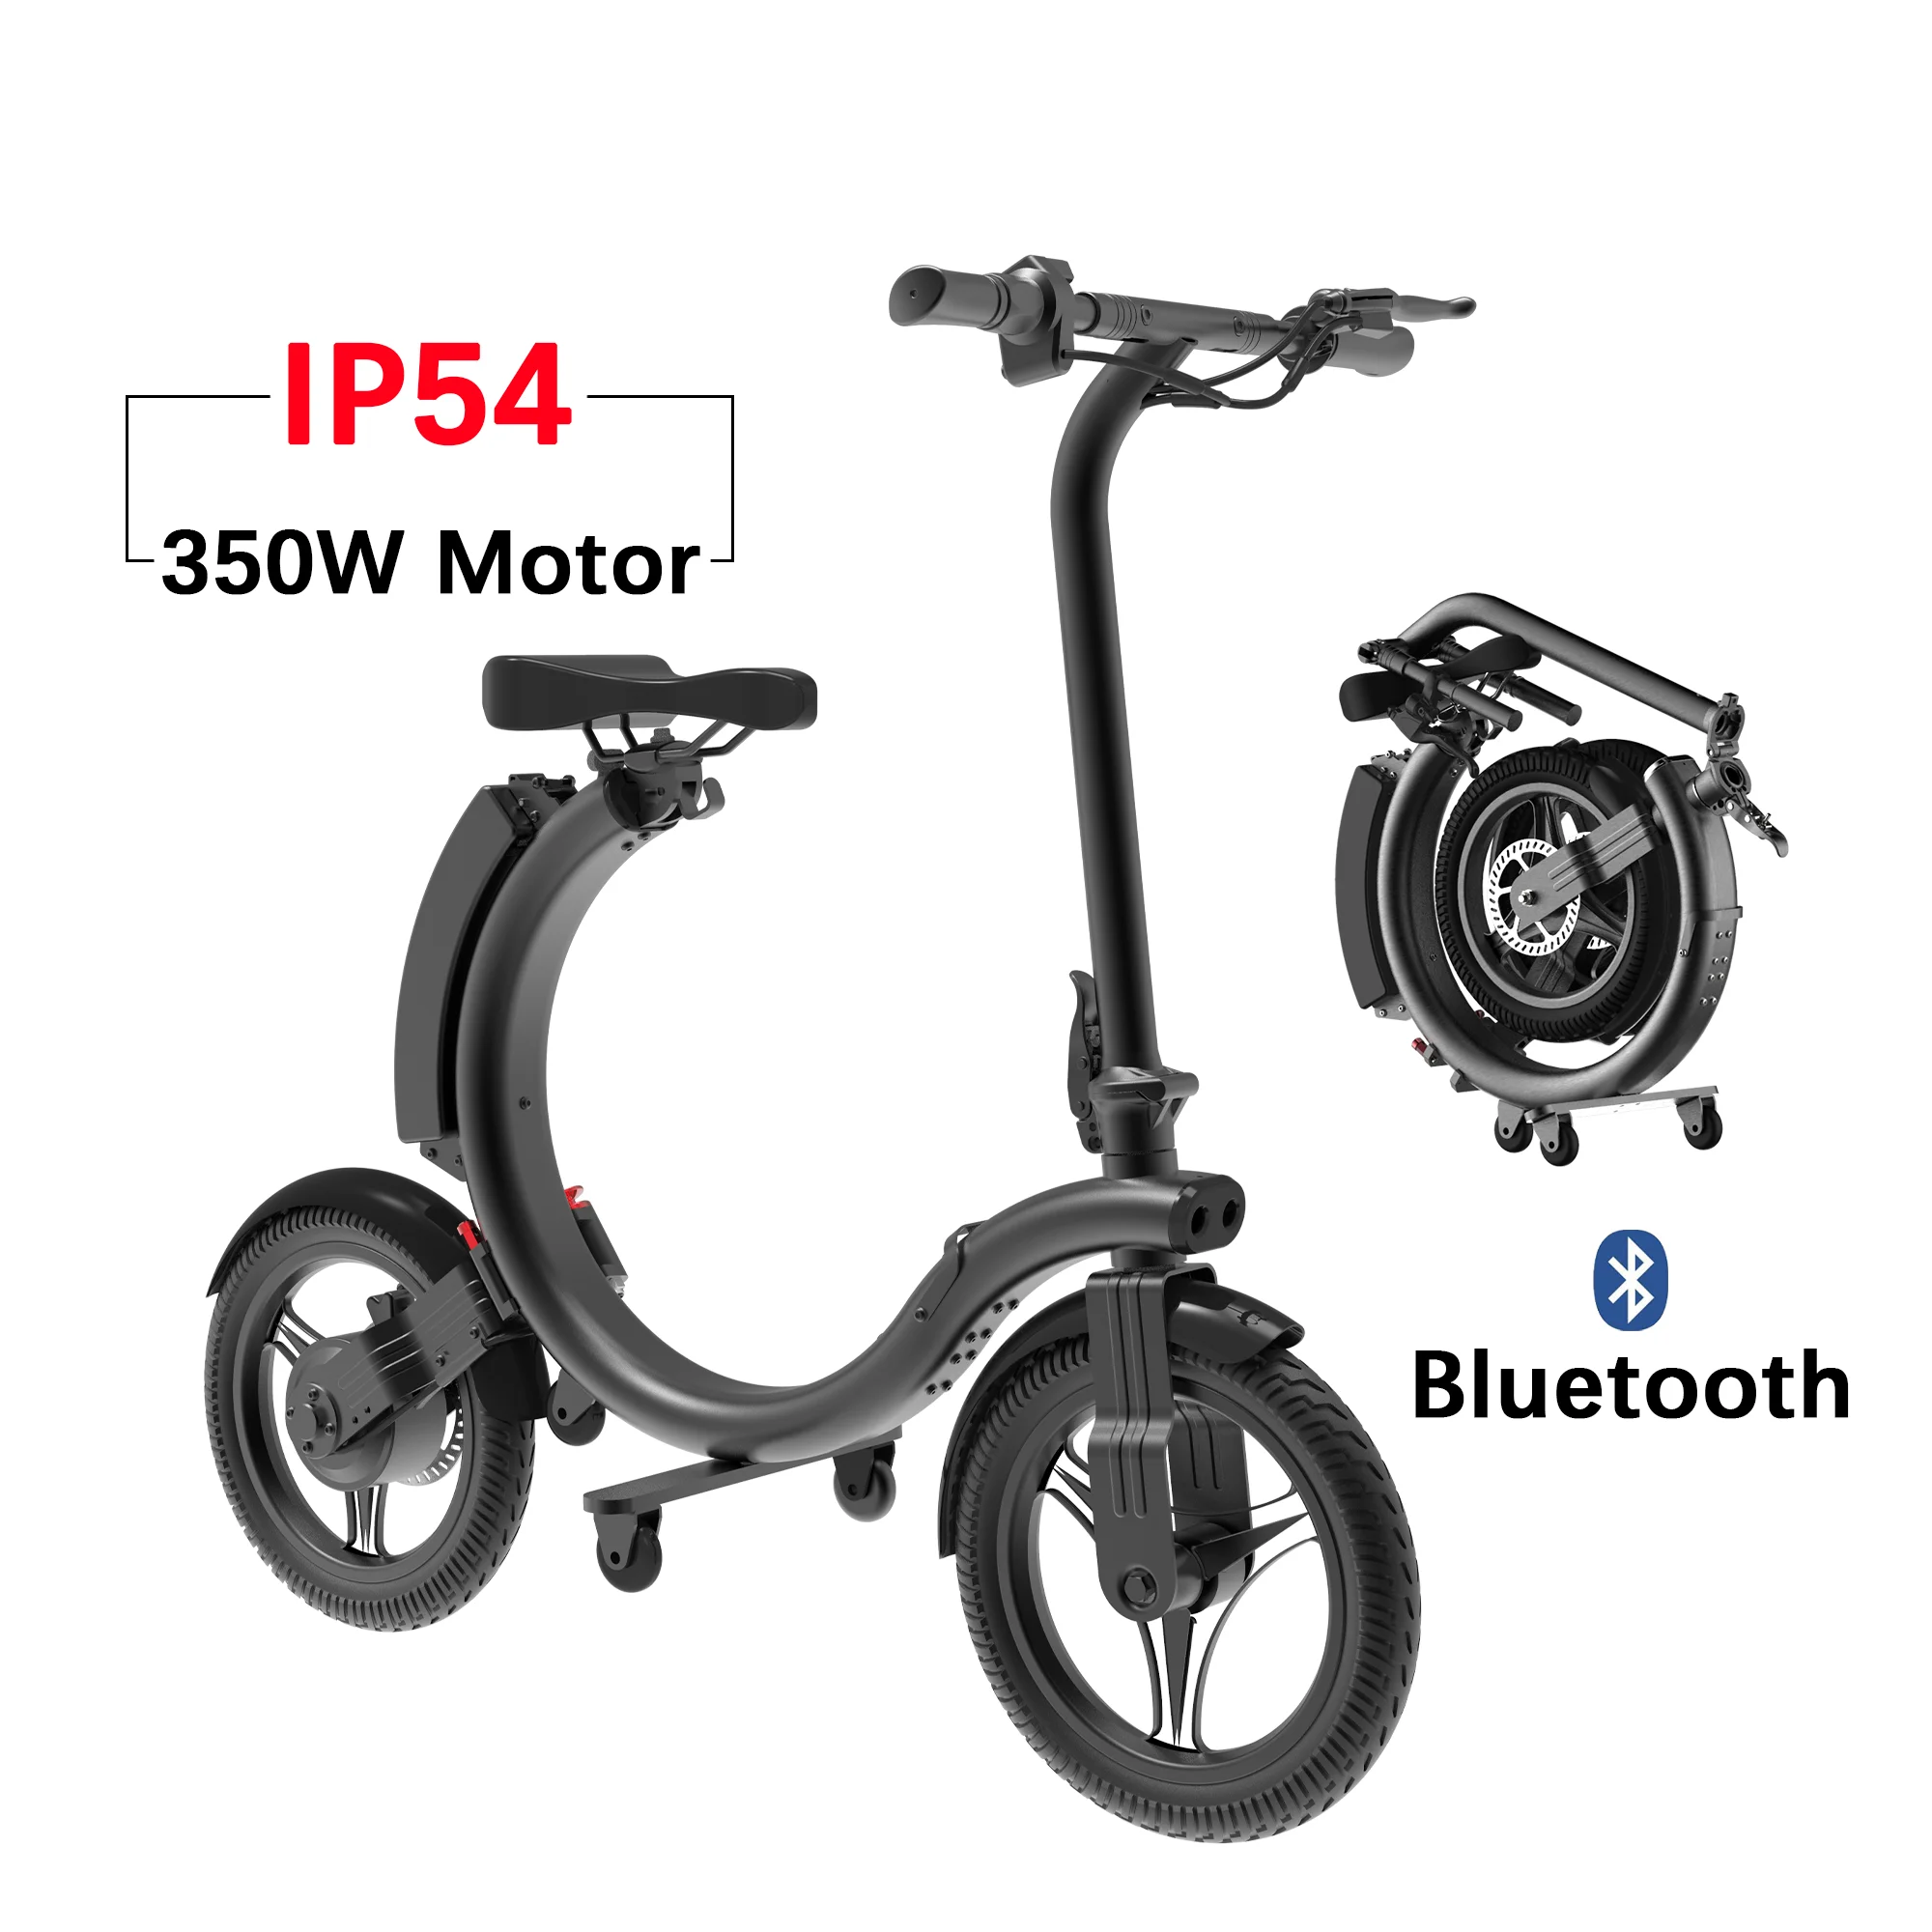 

US warehouse removable lithium battery light weight full folding bike Free shipping fast delivery 14inch 250W 36V 5.2Ah E-bike